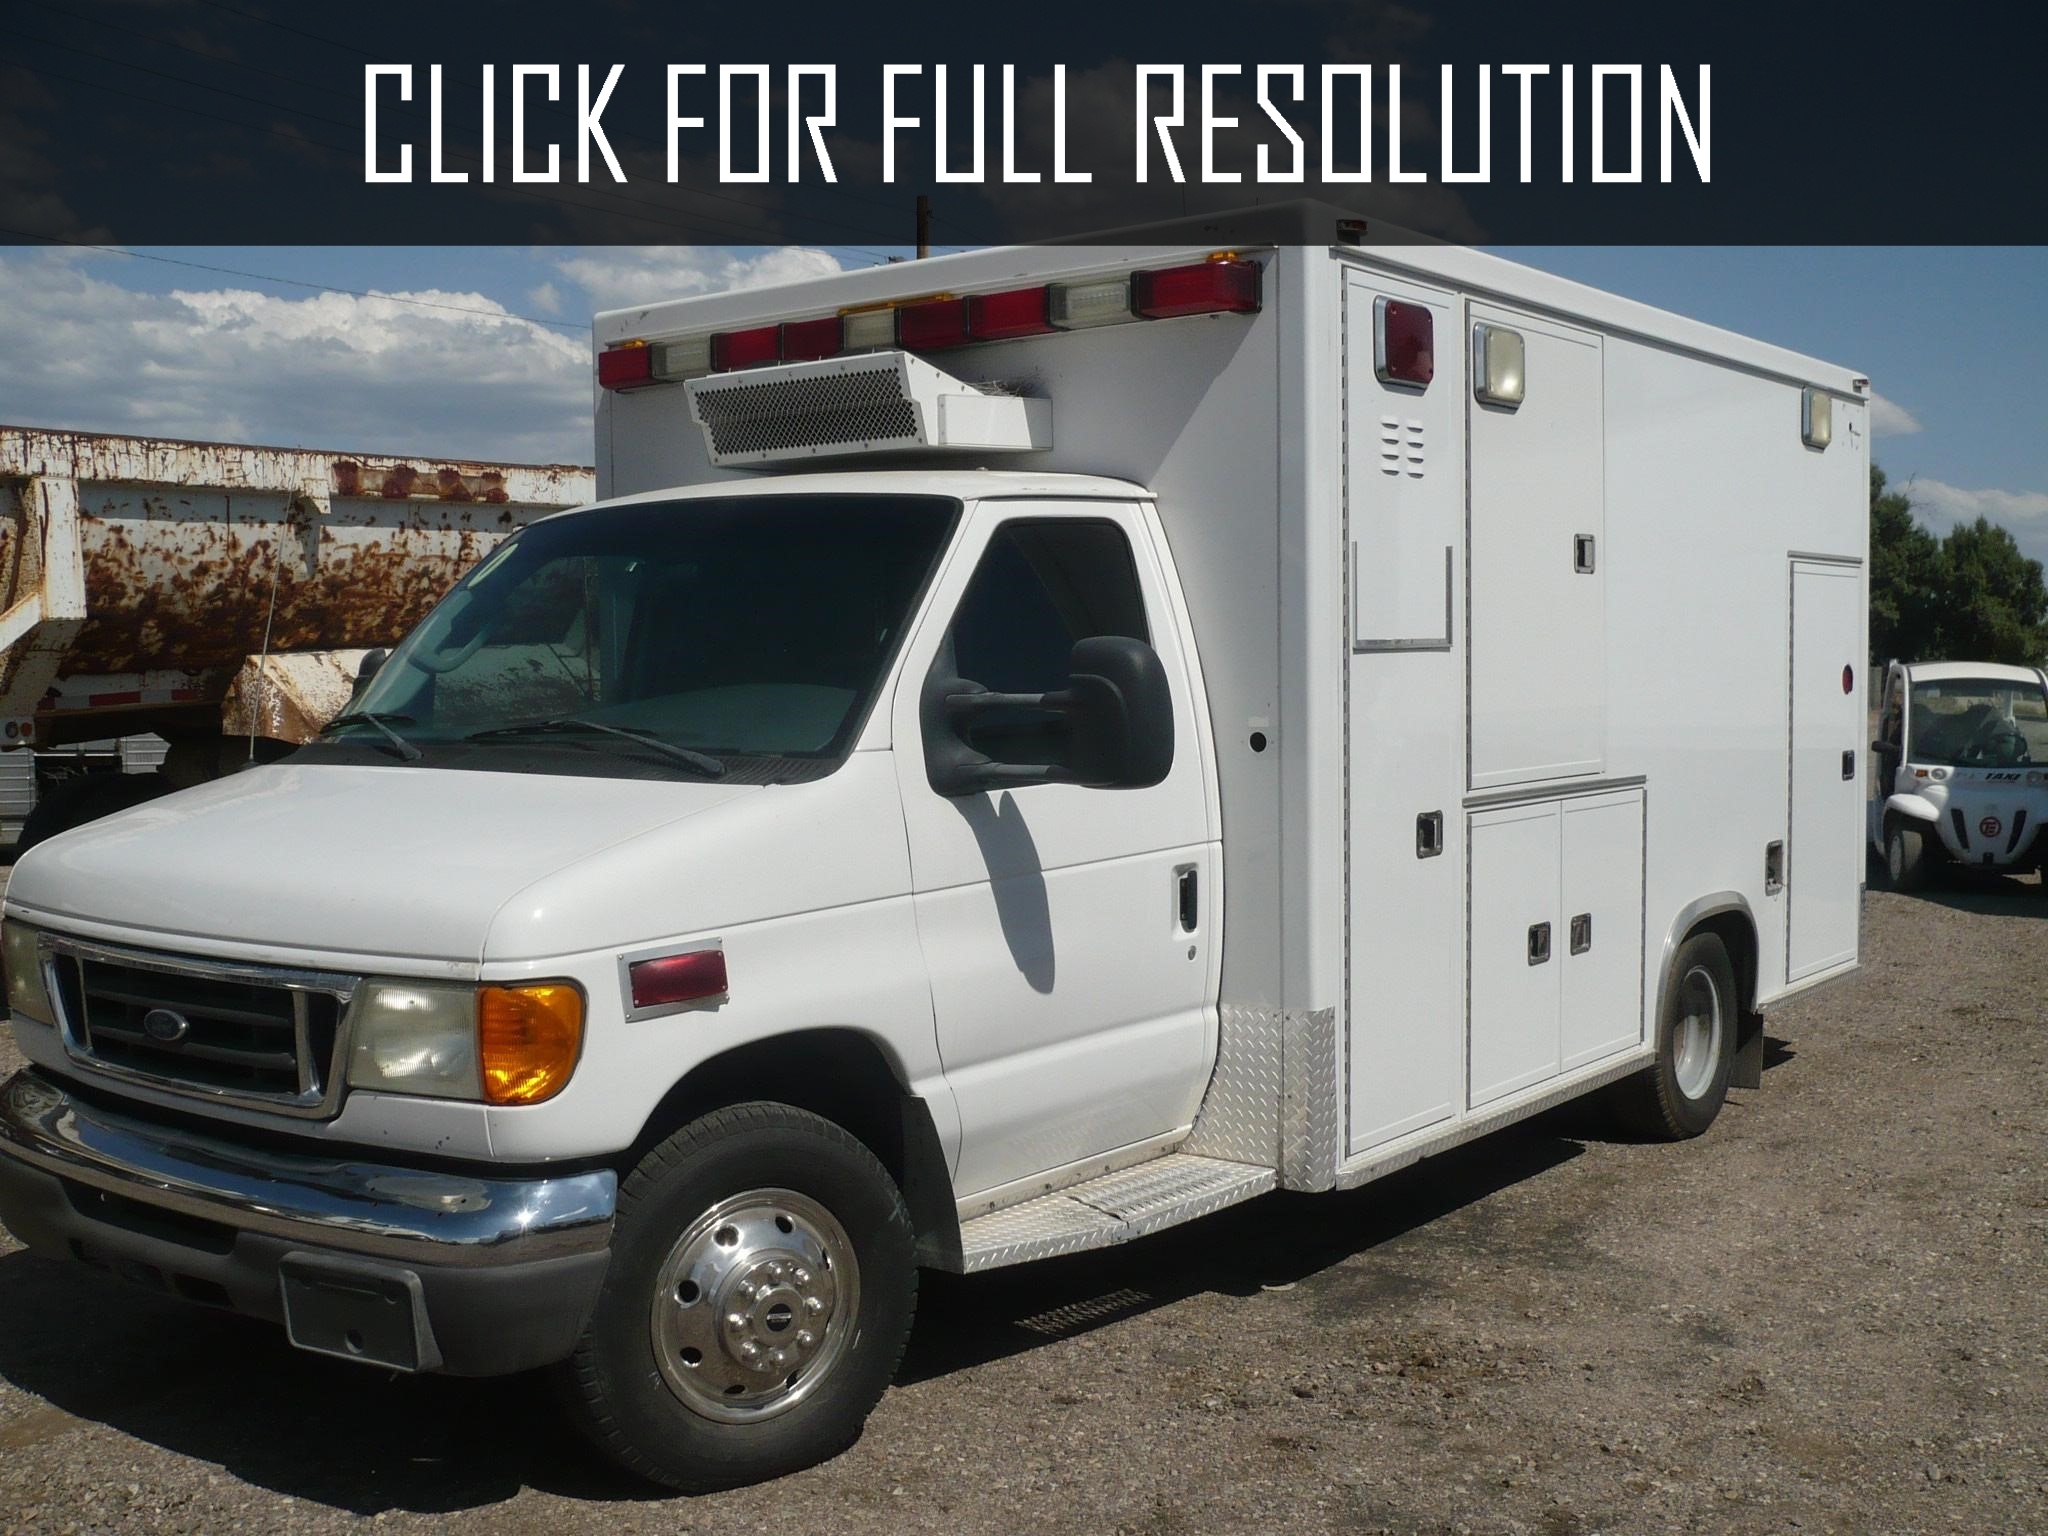 Ford E350 Ambulance amazing photo gallery, some information and